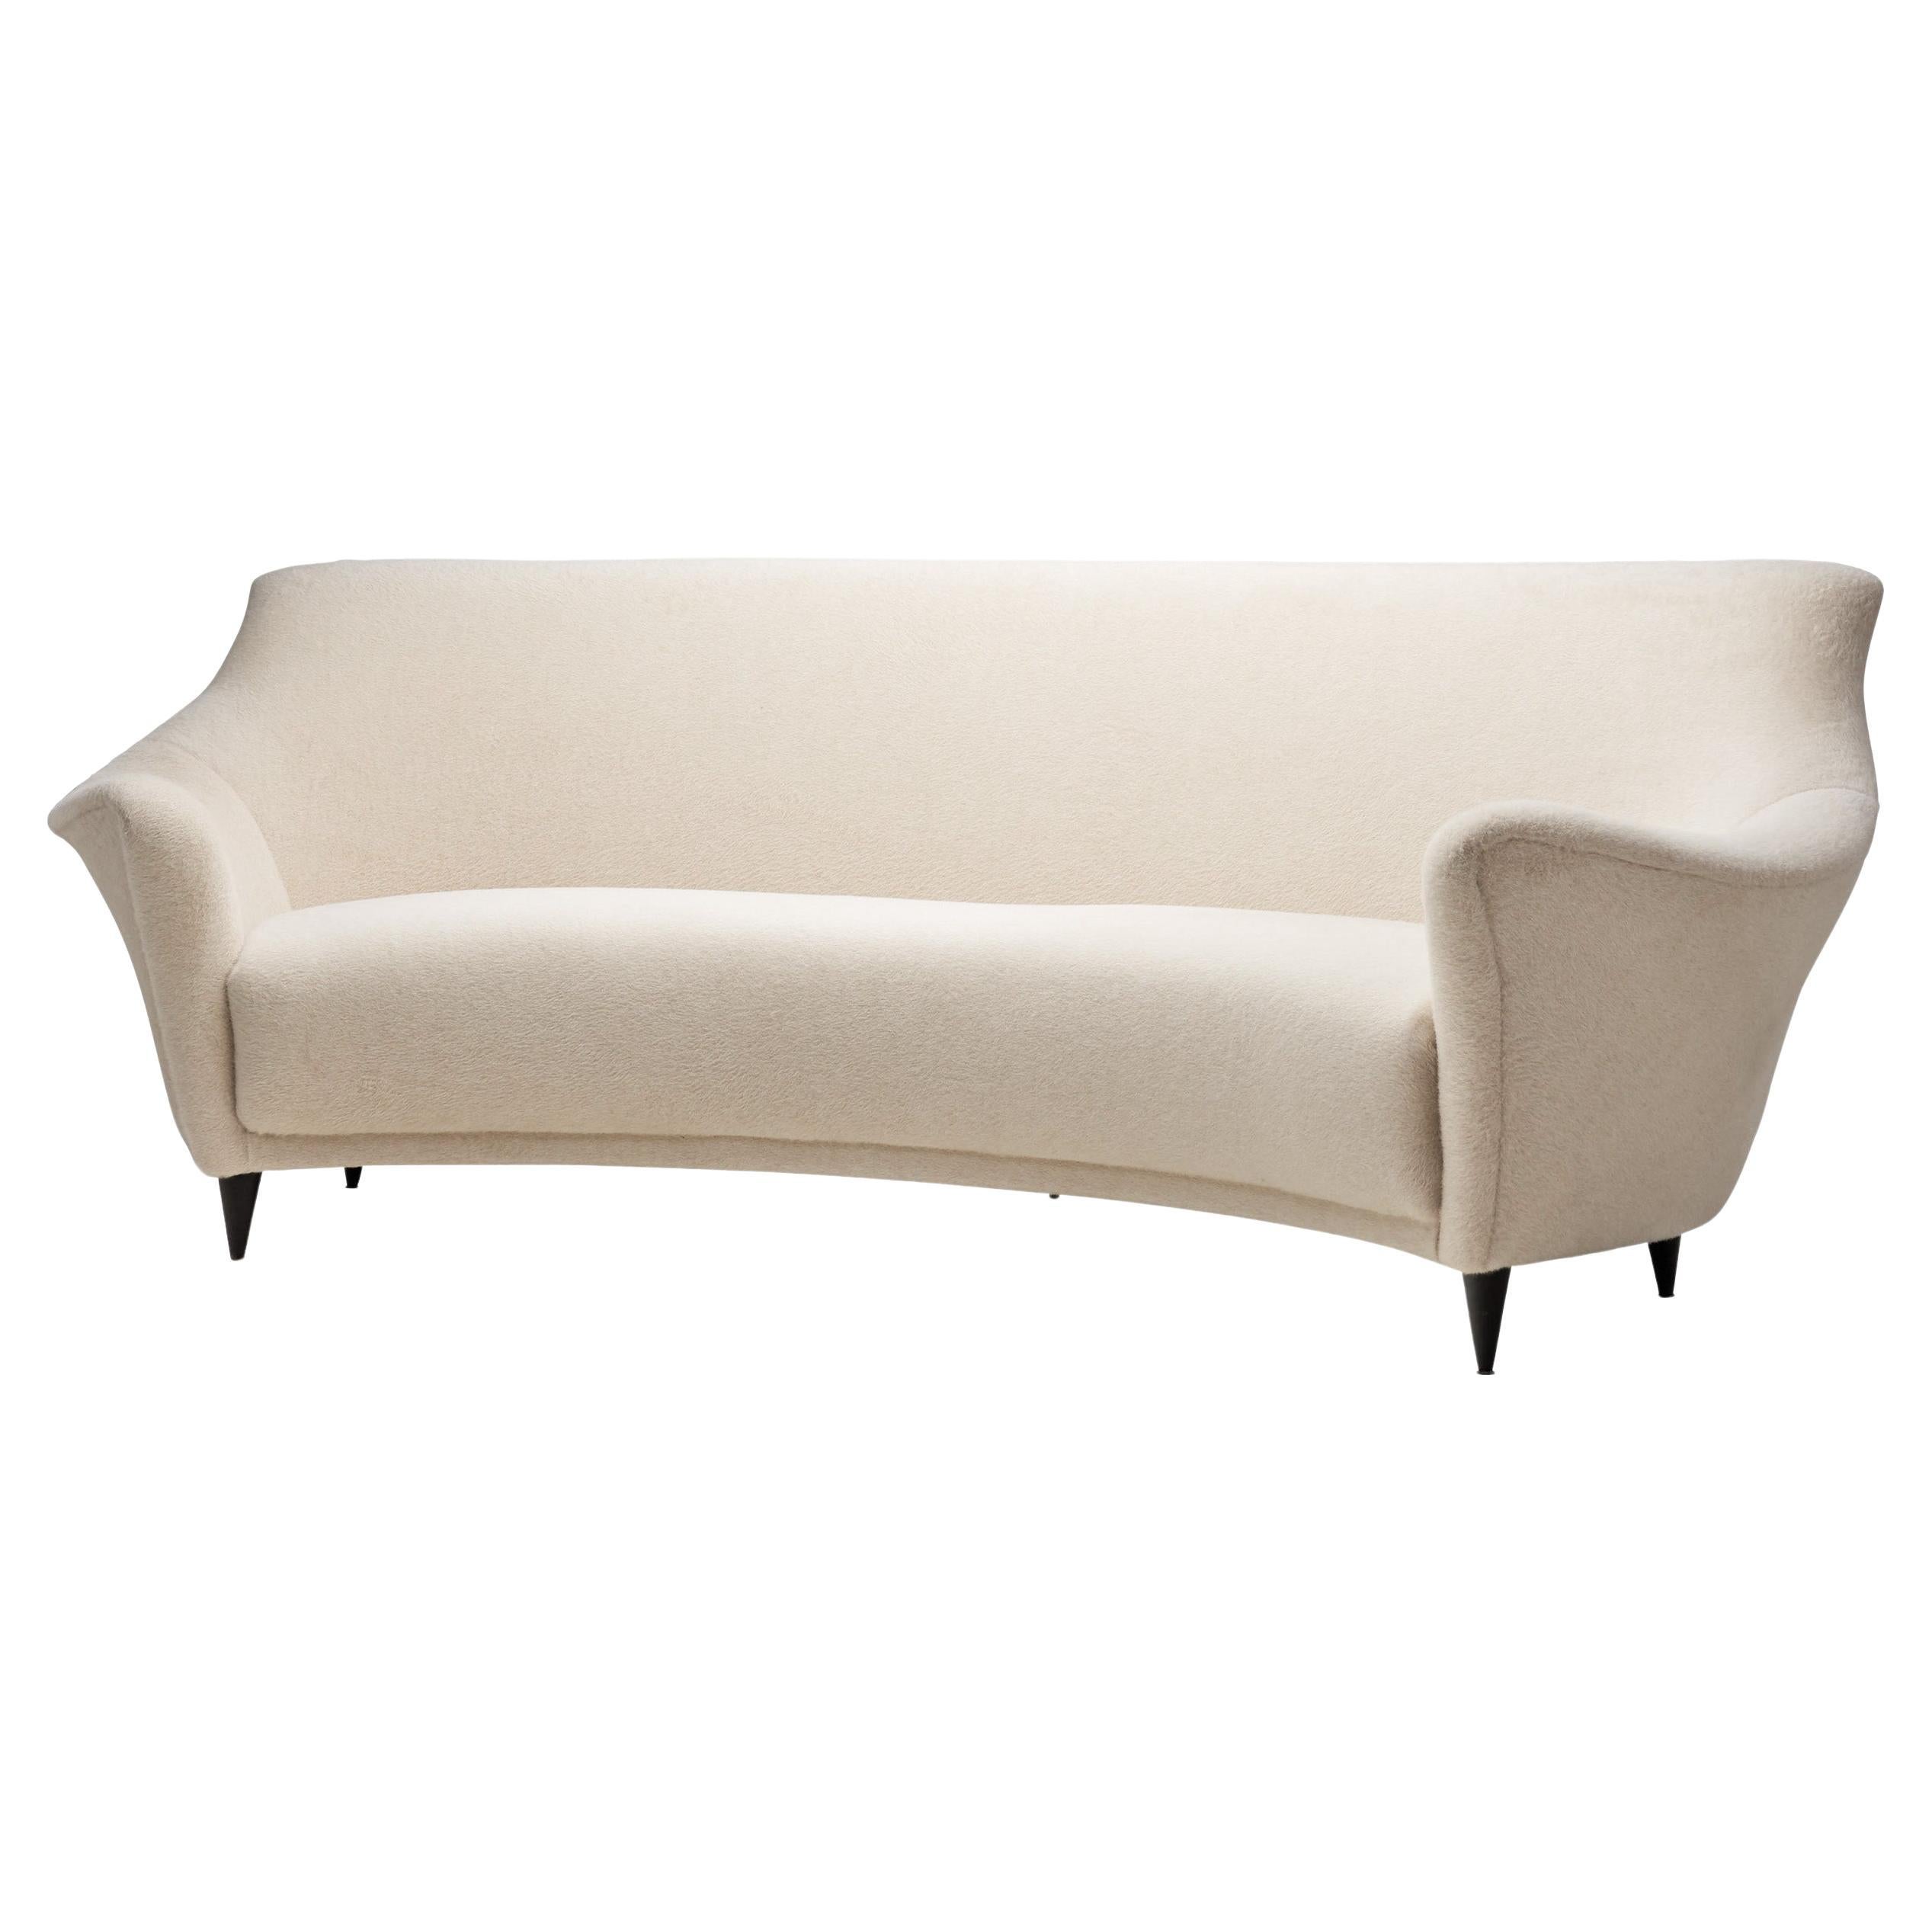 Upholstered Curved Cream Sofa by Ico Parisi (Attr.), Italy 1950s For Sale